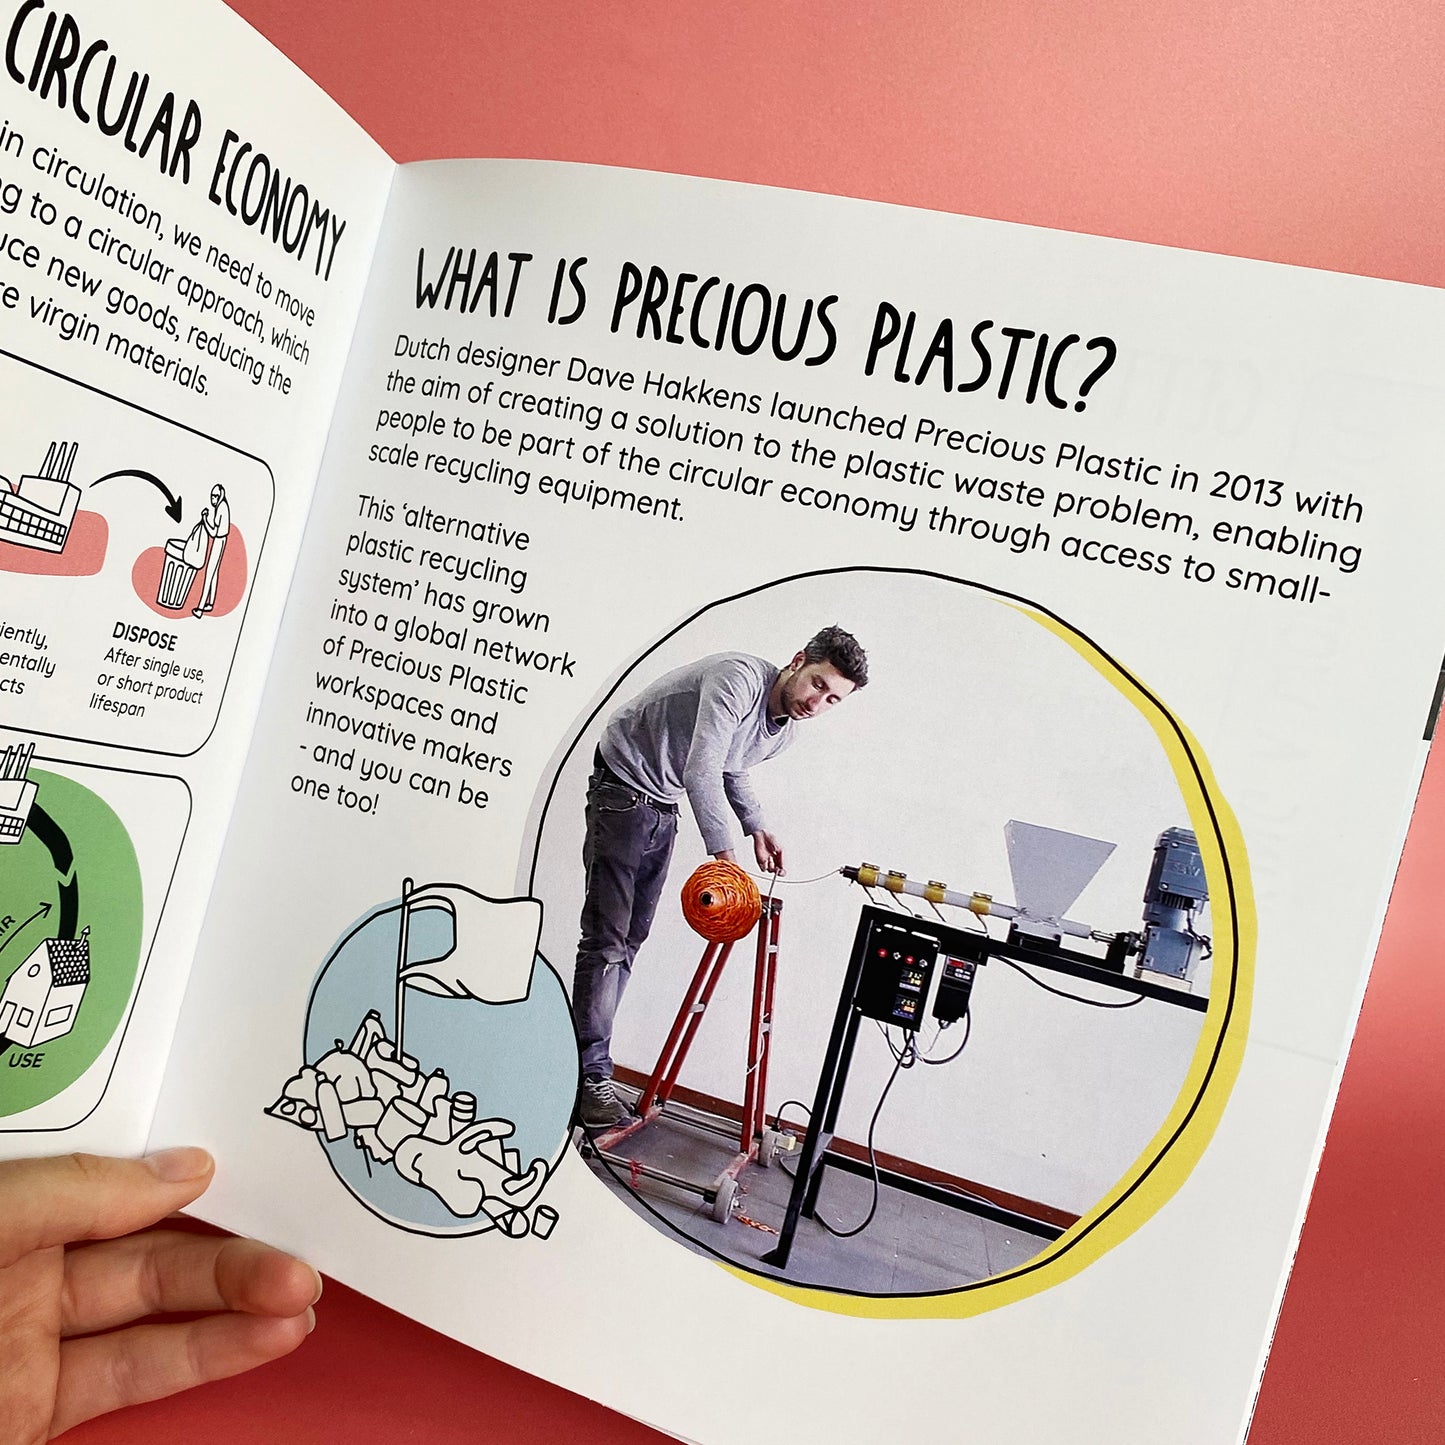 Book - Do-It-Yourself: Setting Up Your Precious Plastic Workspace